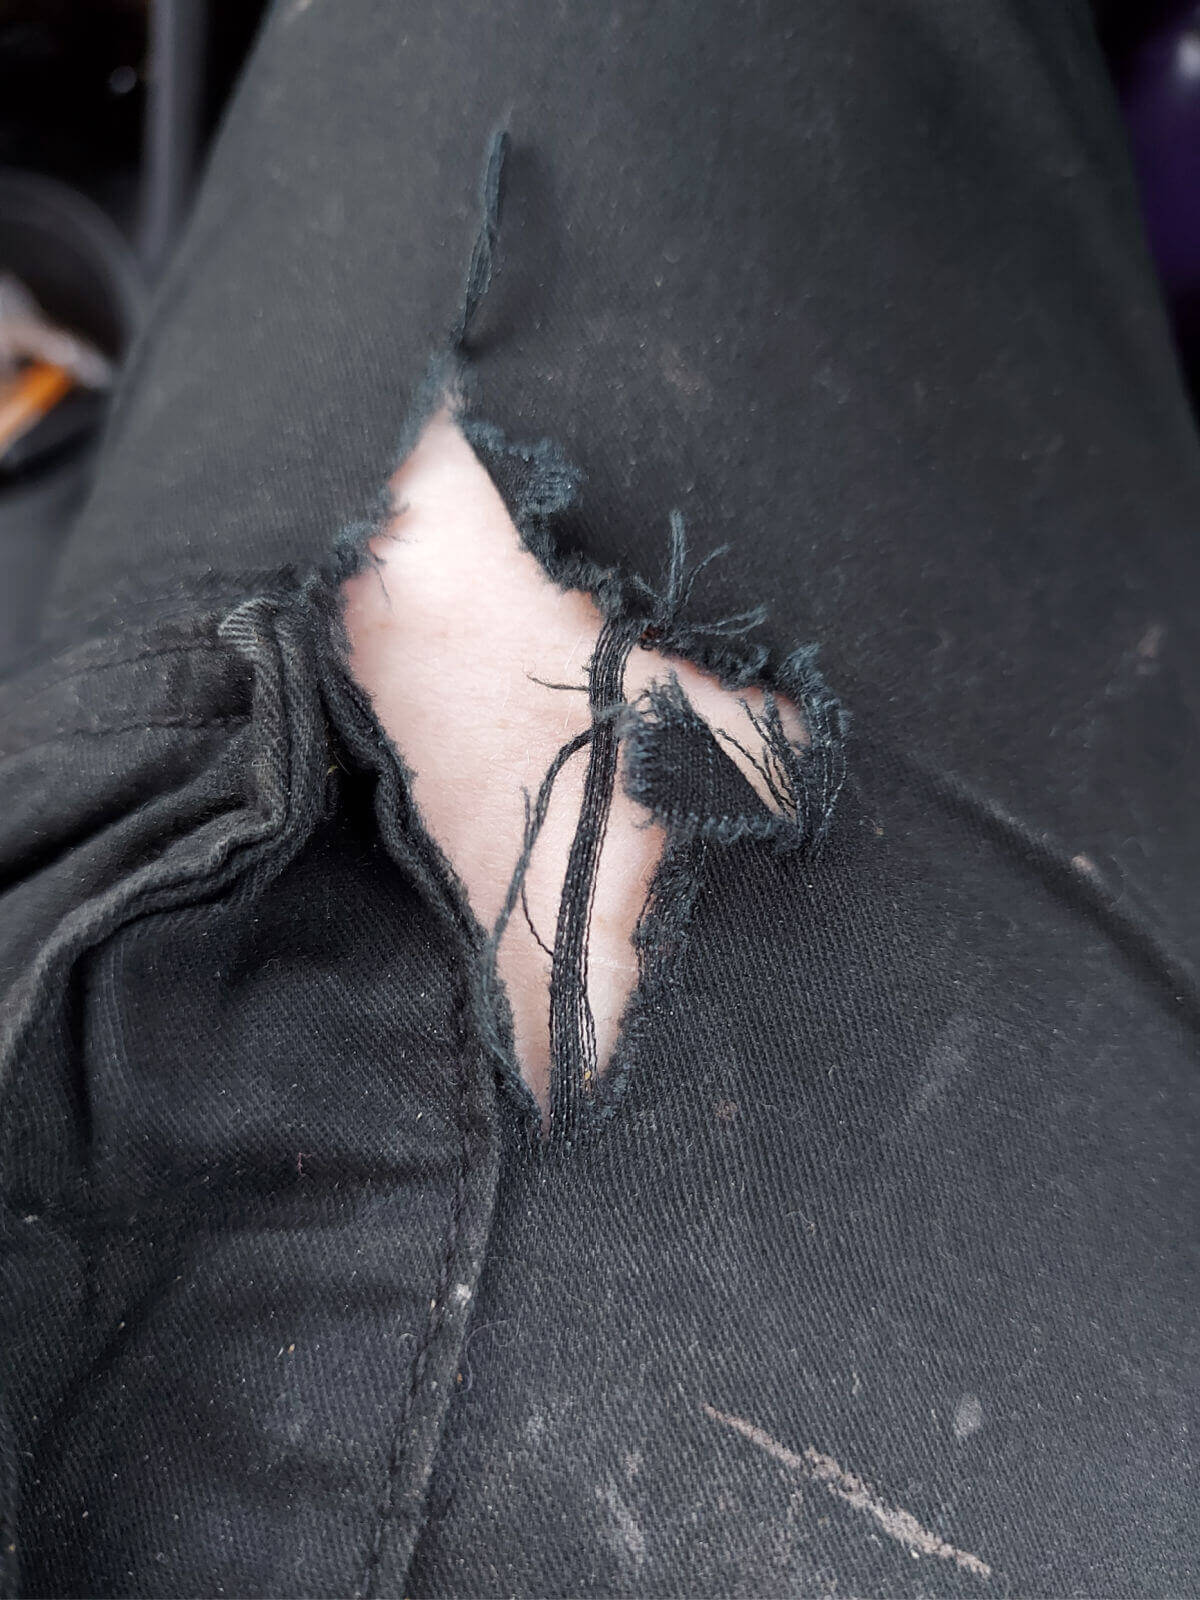 A large hole in a pair of black trousers.